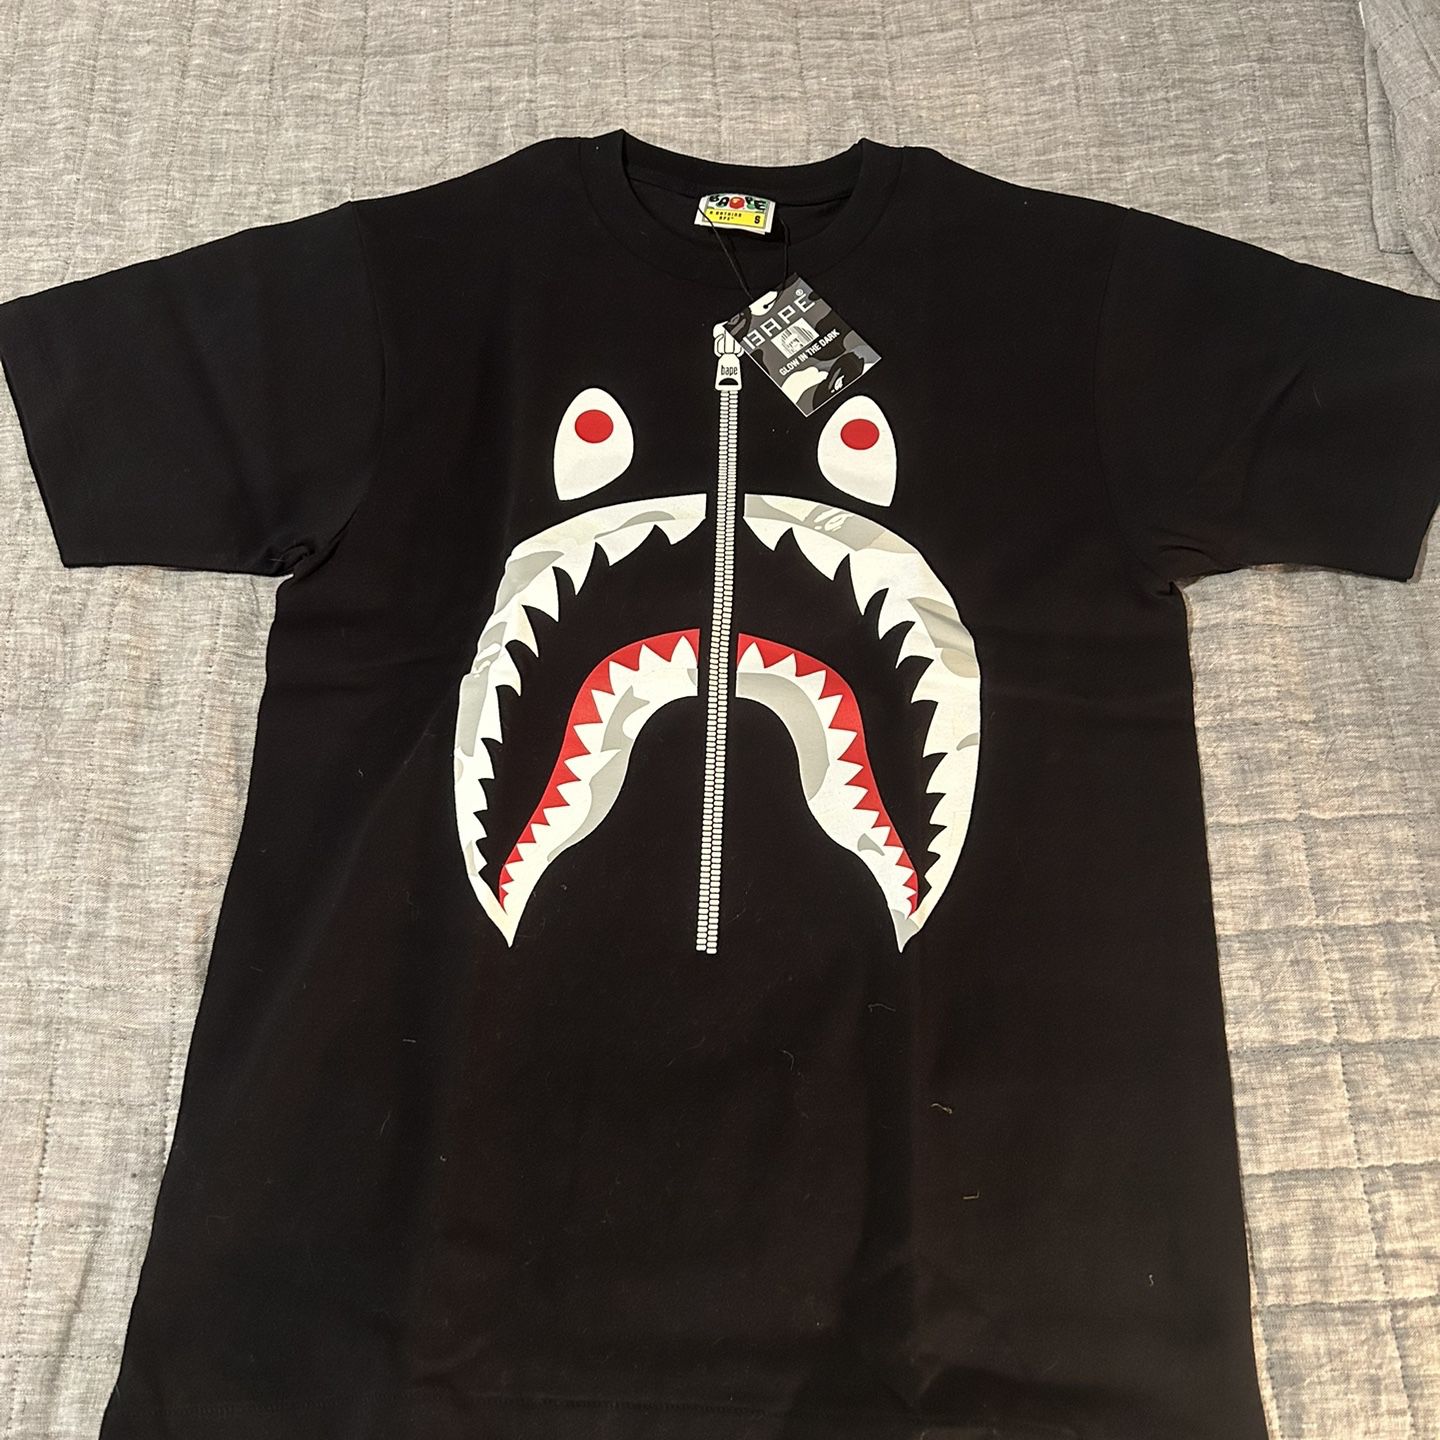 Bape black shark t shirt glow in the dark size S new never worn Ships Same Day Or Next Day  (SEND BEST OFFER)